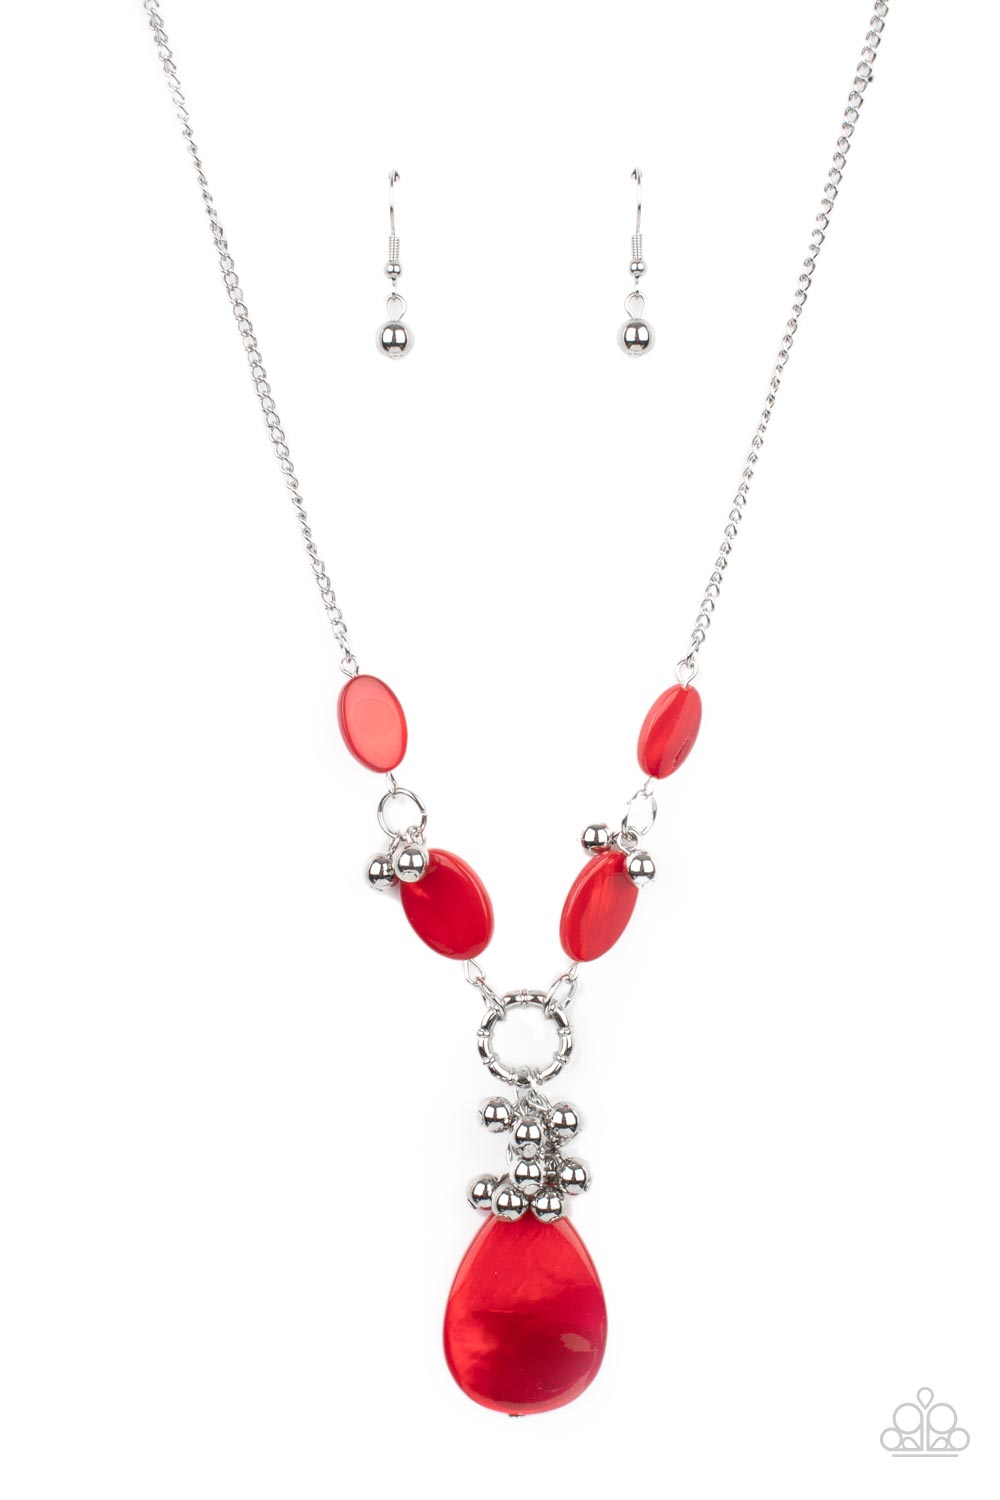 Necklace - Summer Idol - Red